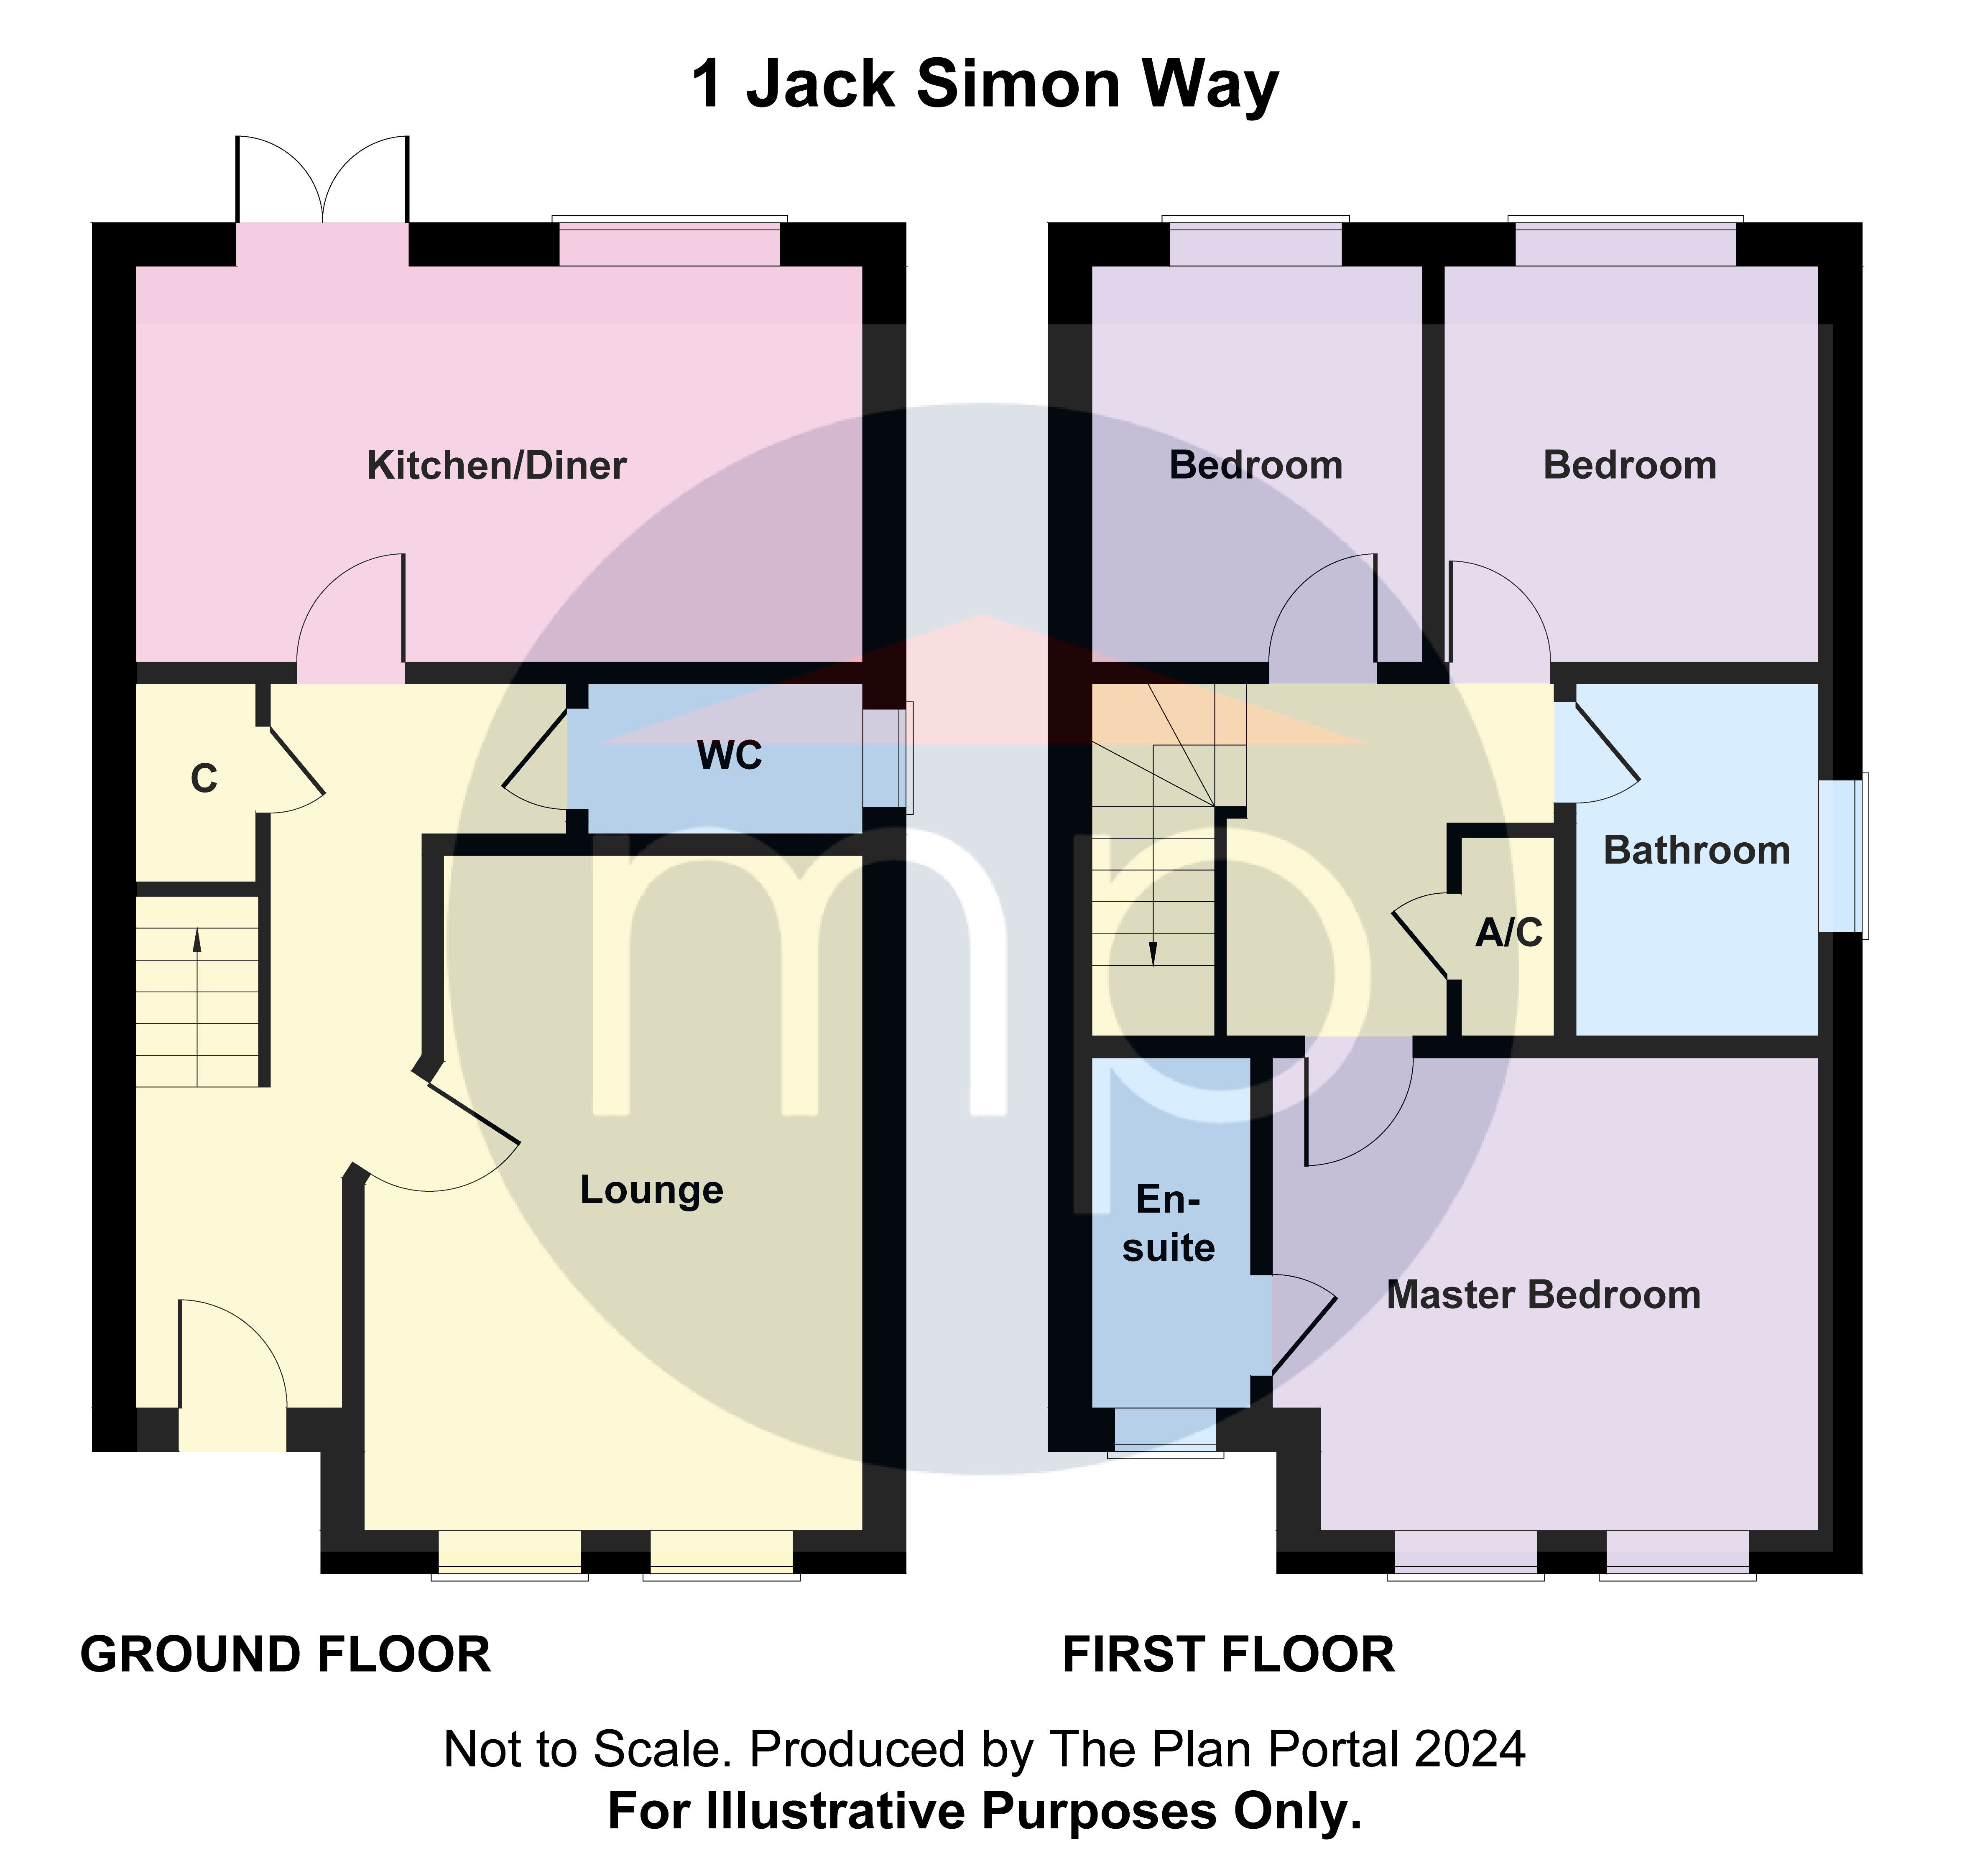 3 bed house for sale in Jack Simon Way, Stainsby Hall Farm - Property floorplan